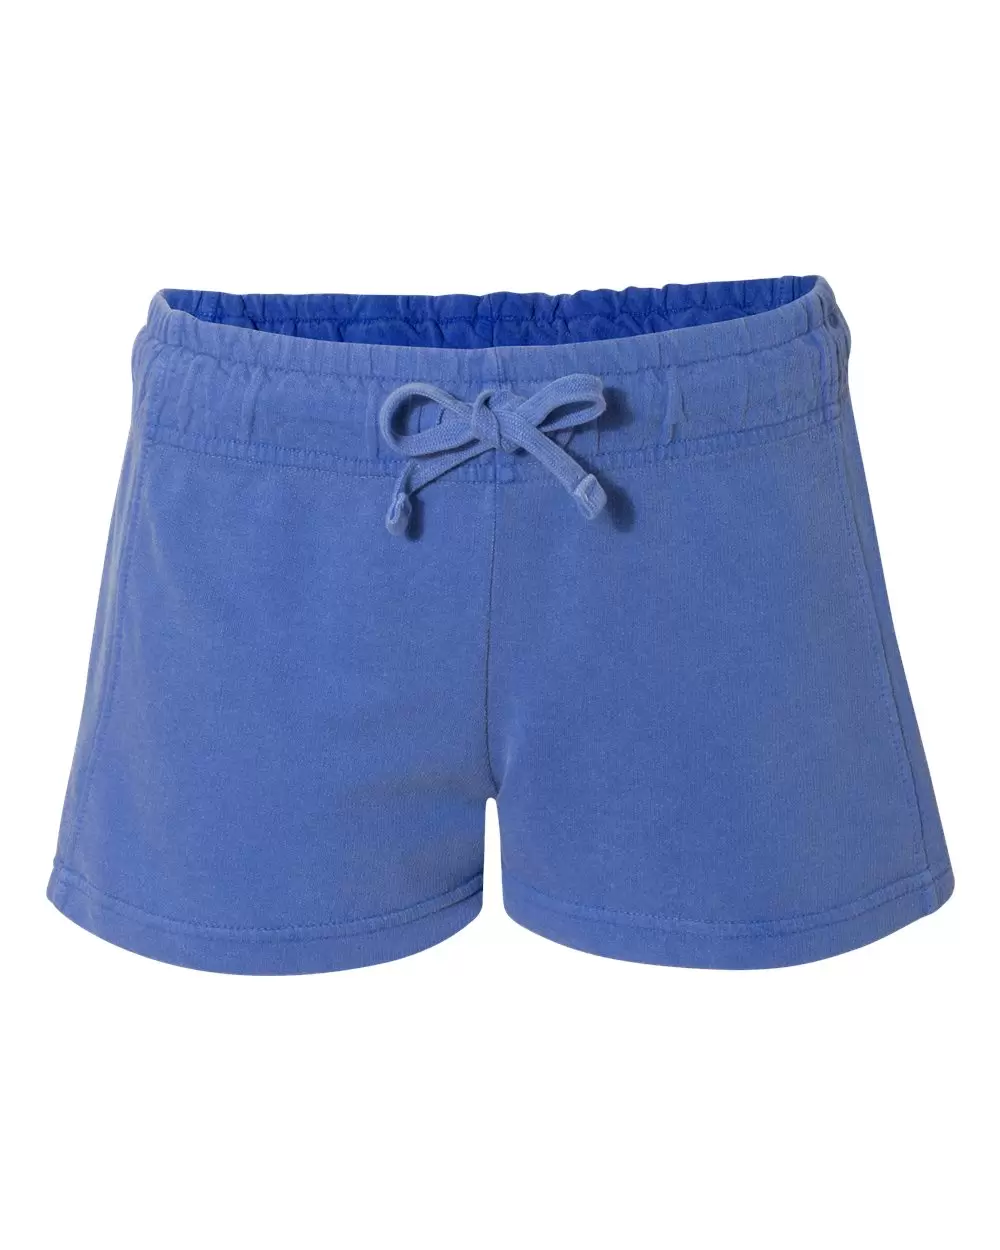 Comfort Colors 1537L Women's French Terry Shorts - From $8.69